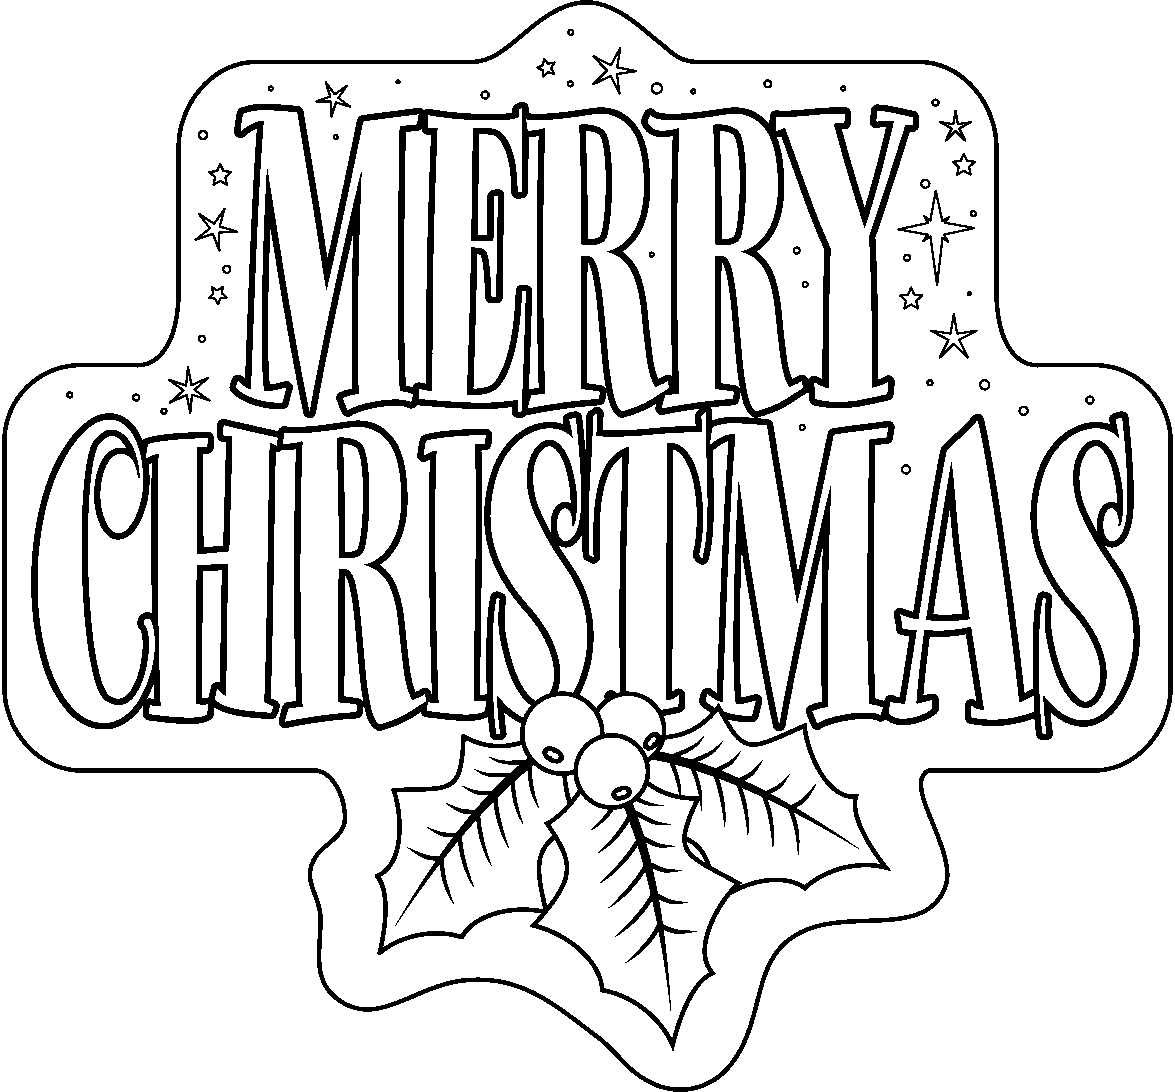 Merry Christmas Clip Art Black And White (11)